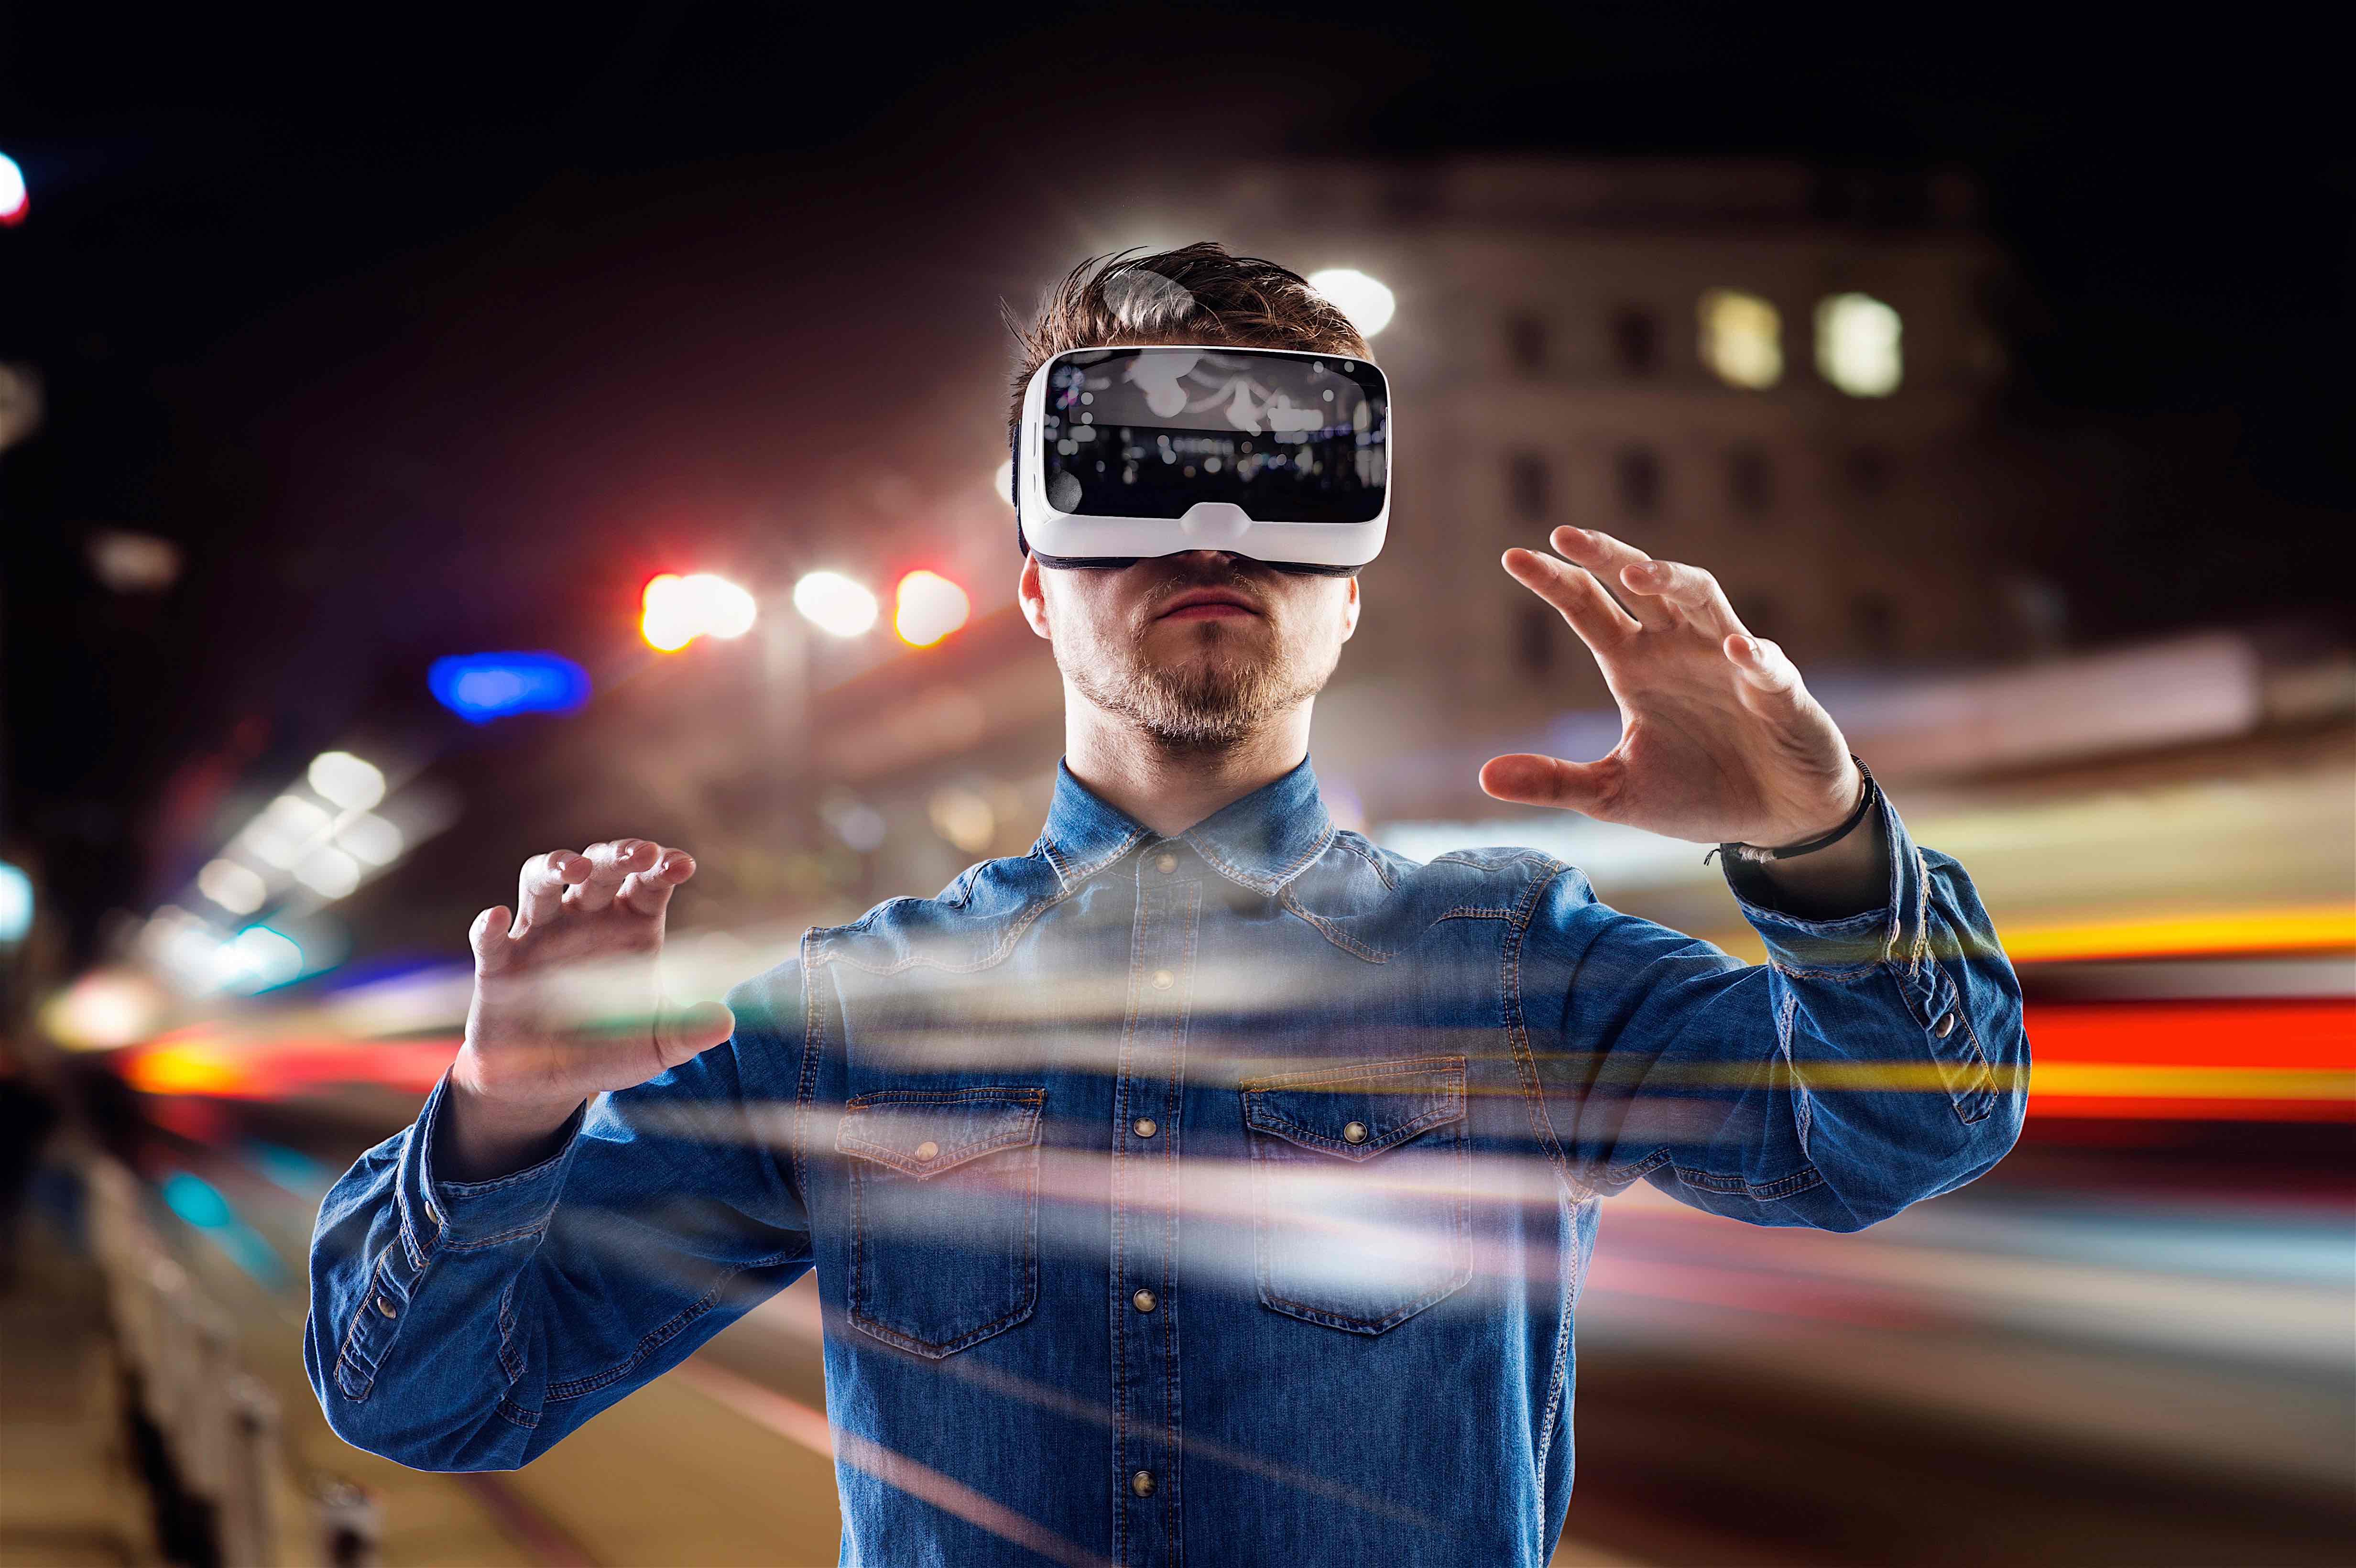 Improving Urban Planning with Virtual Reality